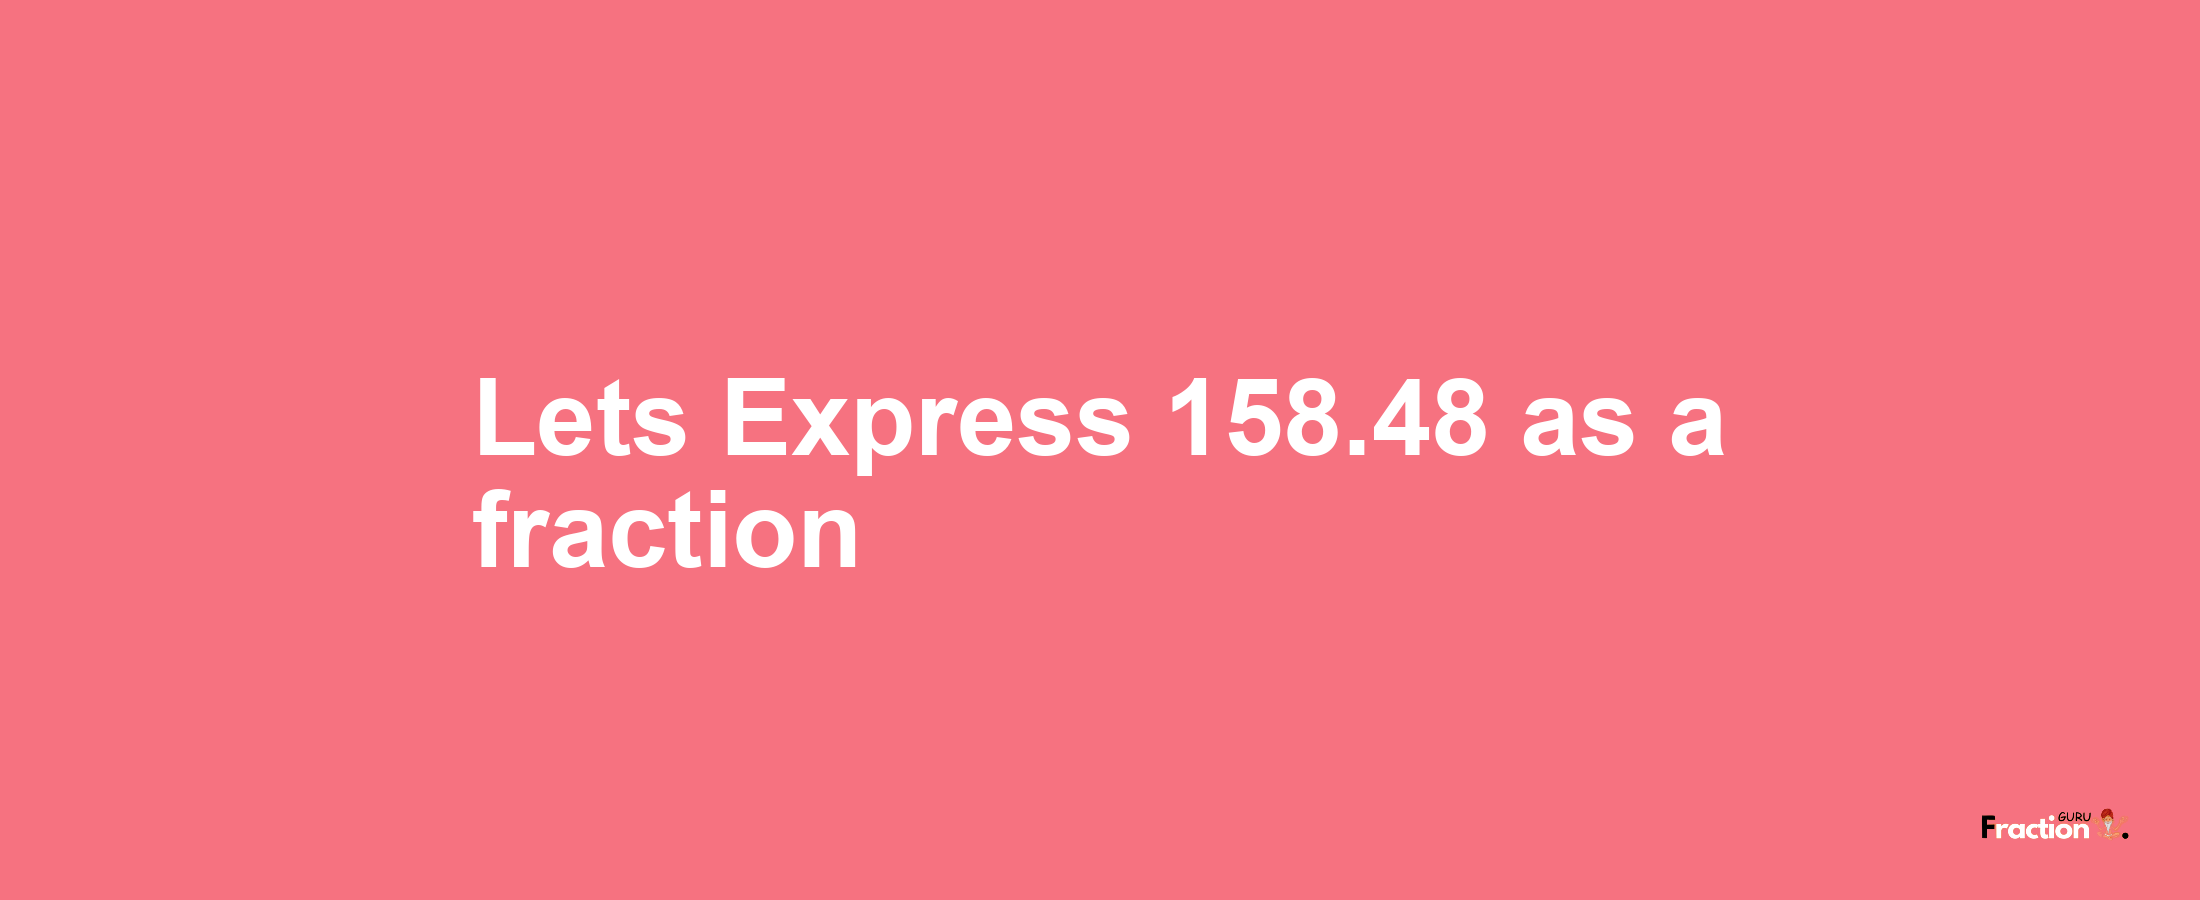 Lets Express 158.48 as afraction